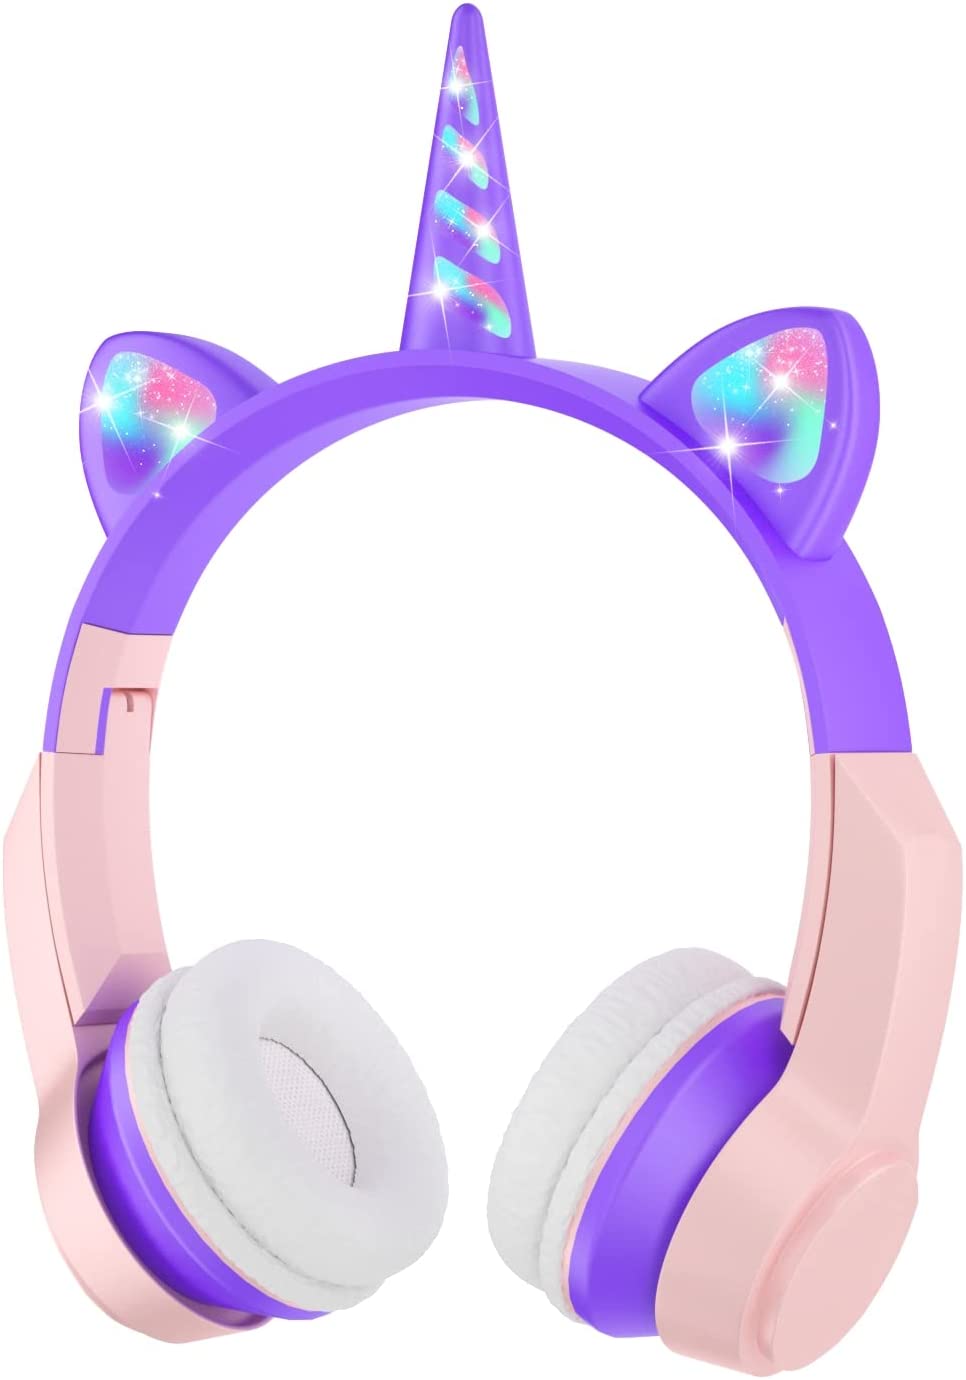 UNICORN Cat Ear Bluetooth Wireless LED Foldable Headphone Headset with Built in Mic and FM Radio for